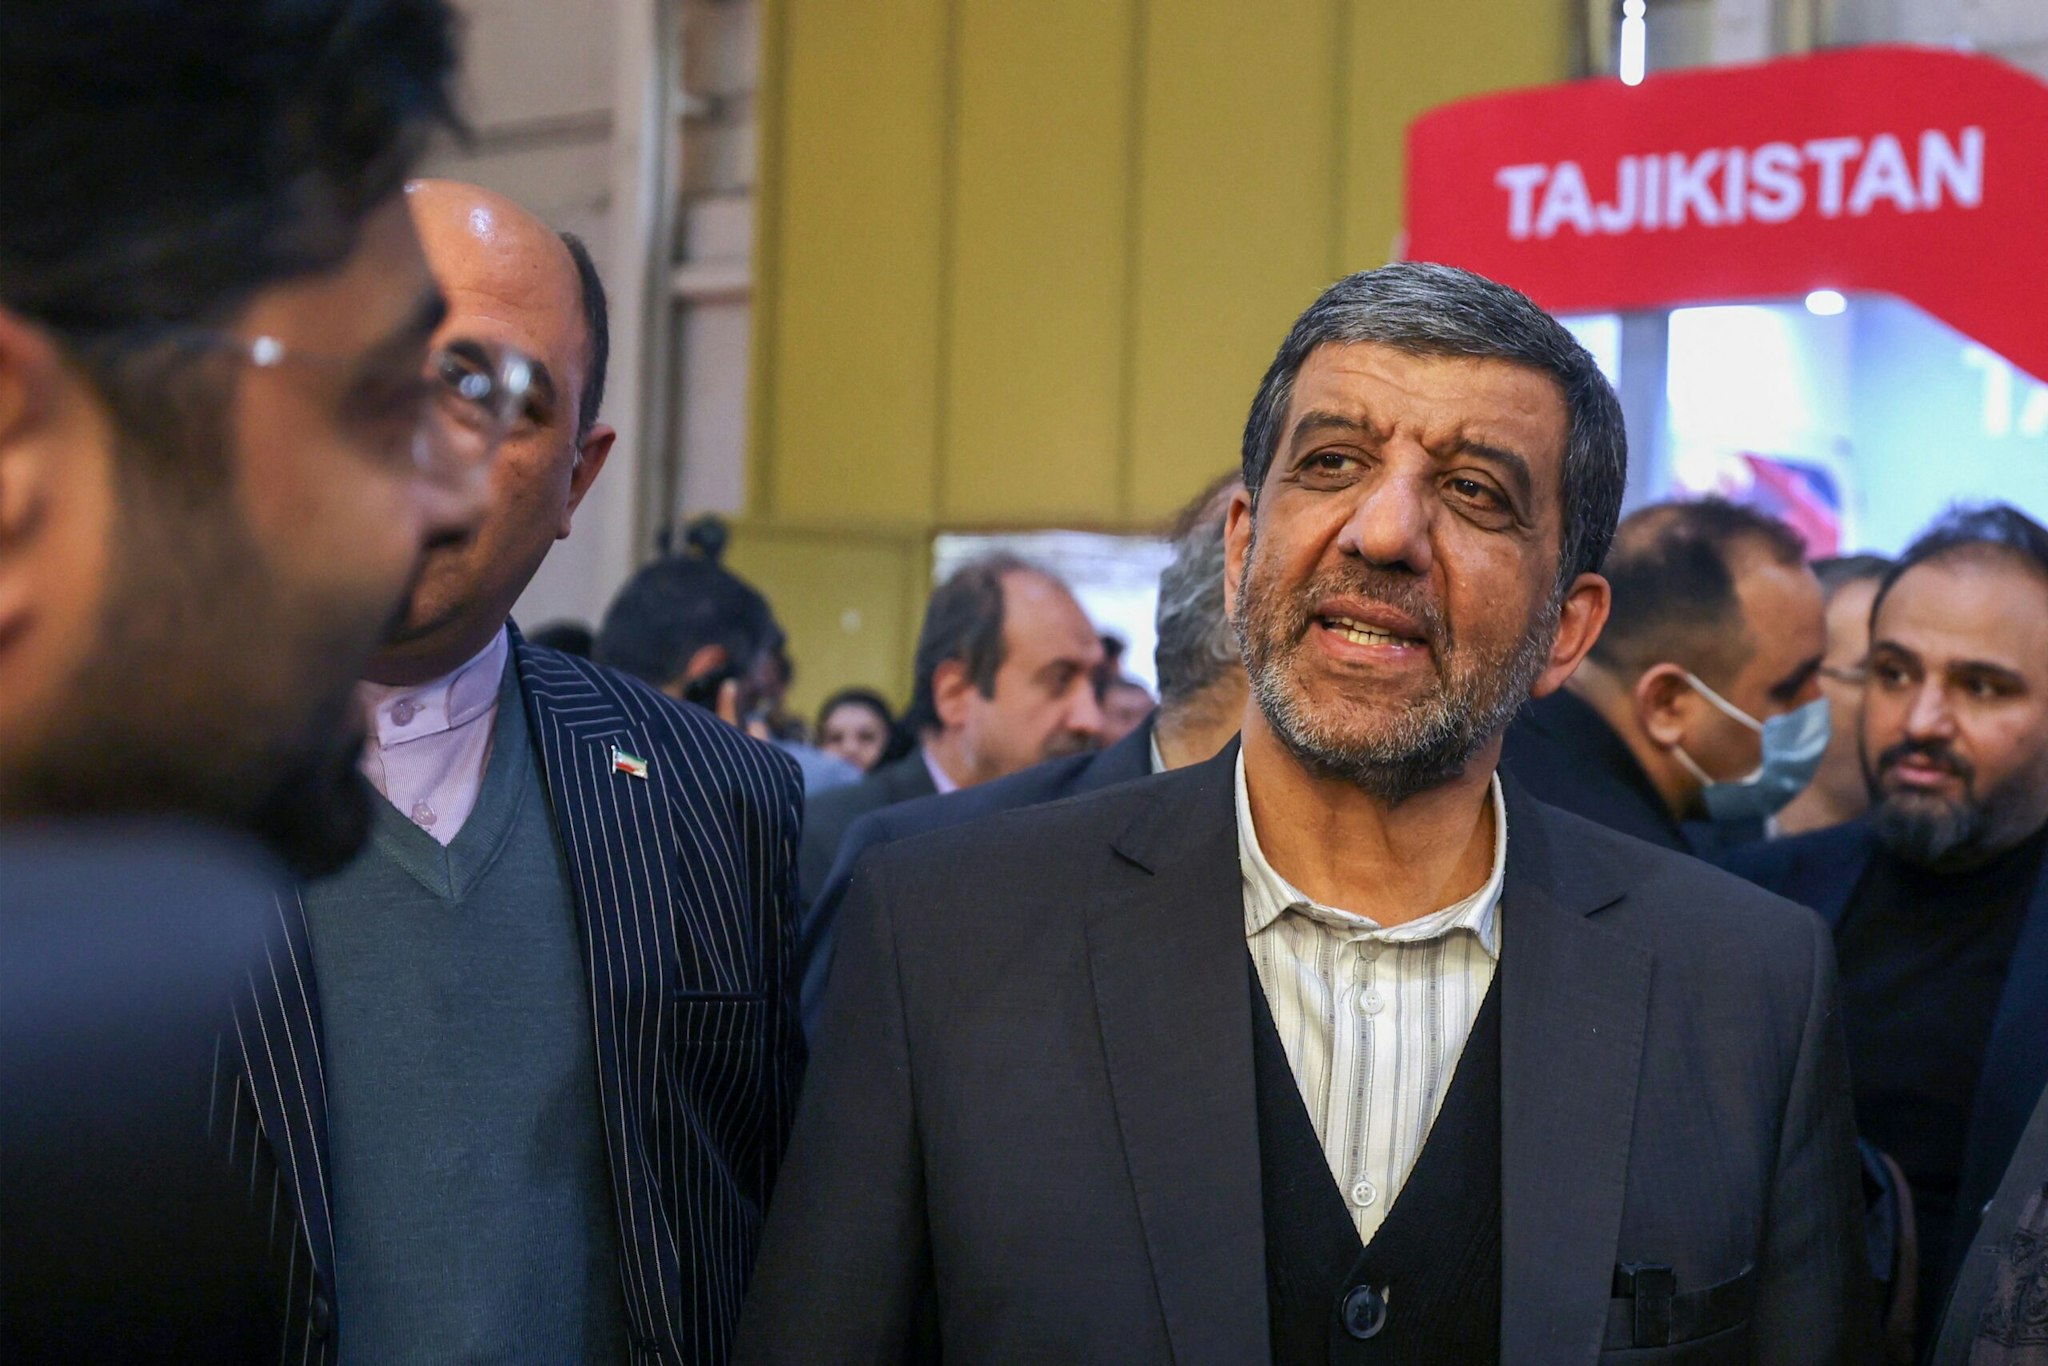 Iran's Culture Minister Ezzatollah Zarghami attends the 16th International Exhibition of Tourism and Related Industries in Tehran on February 7, 2023.